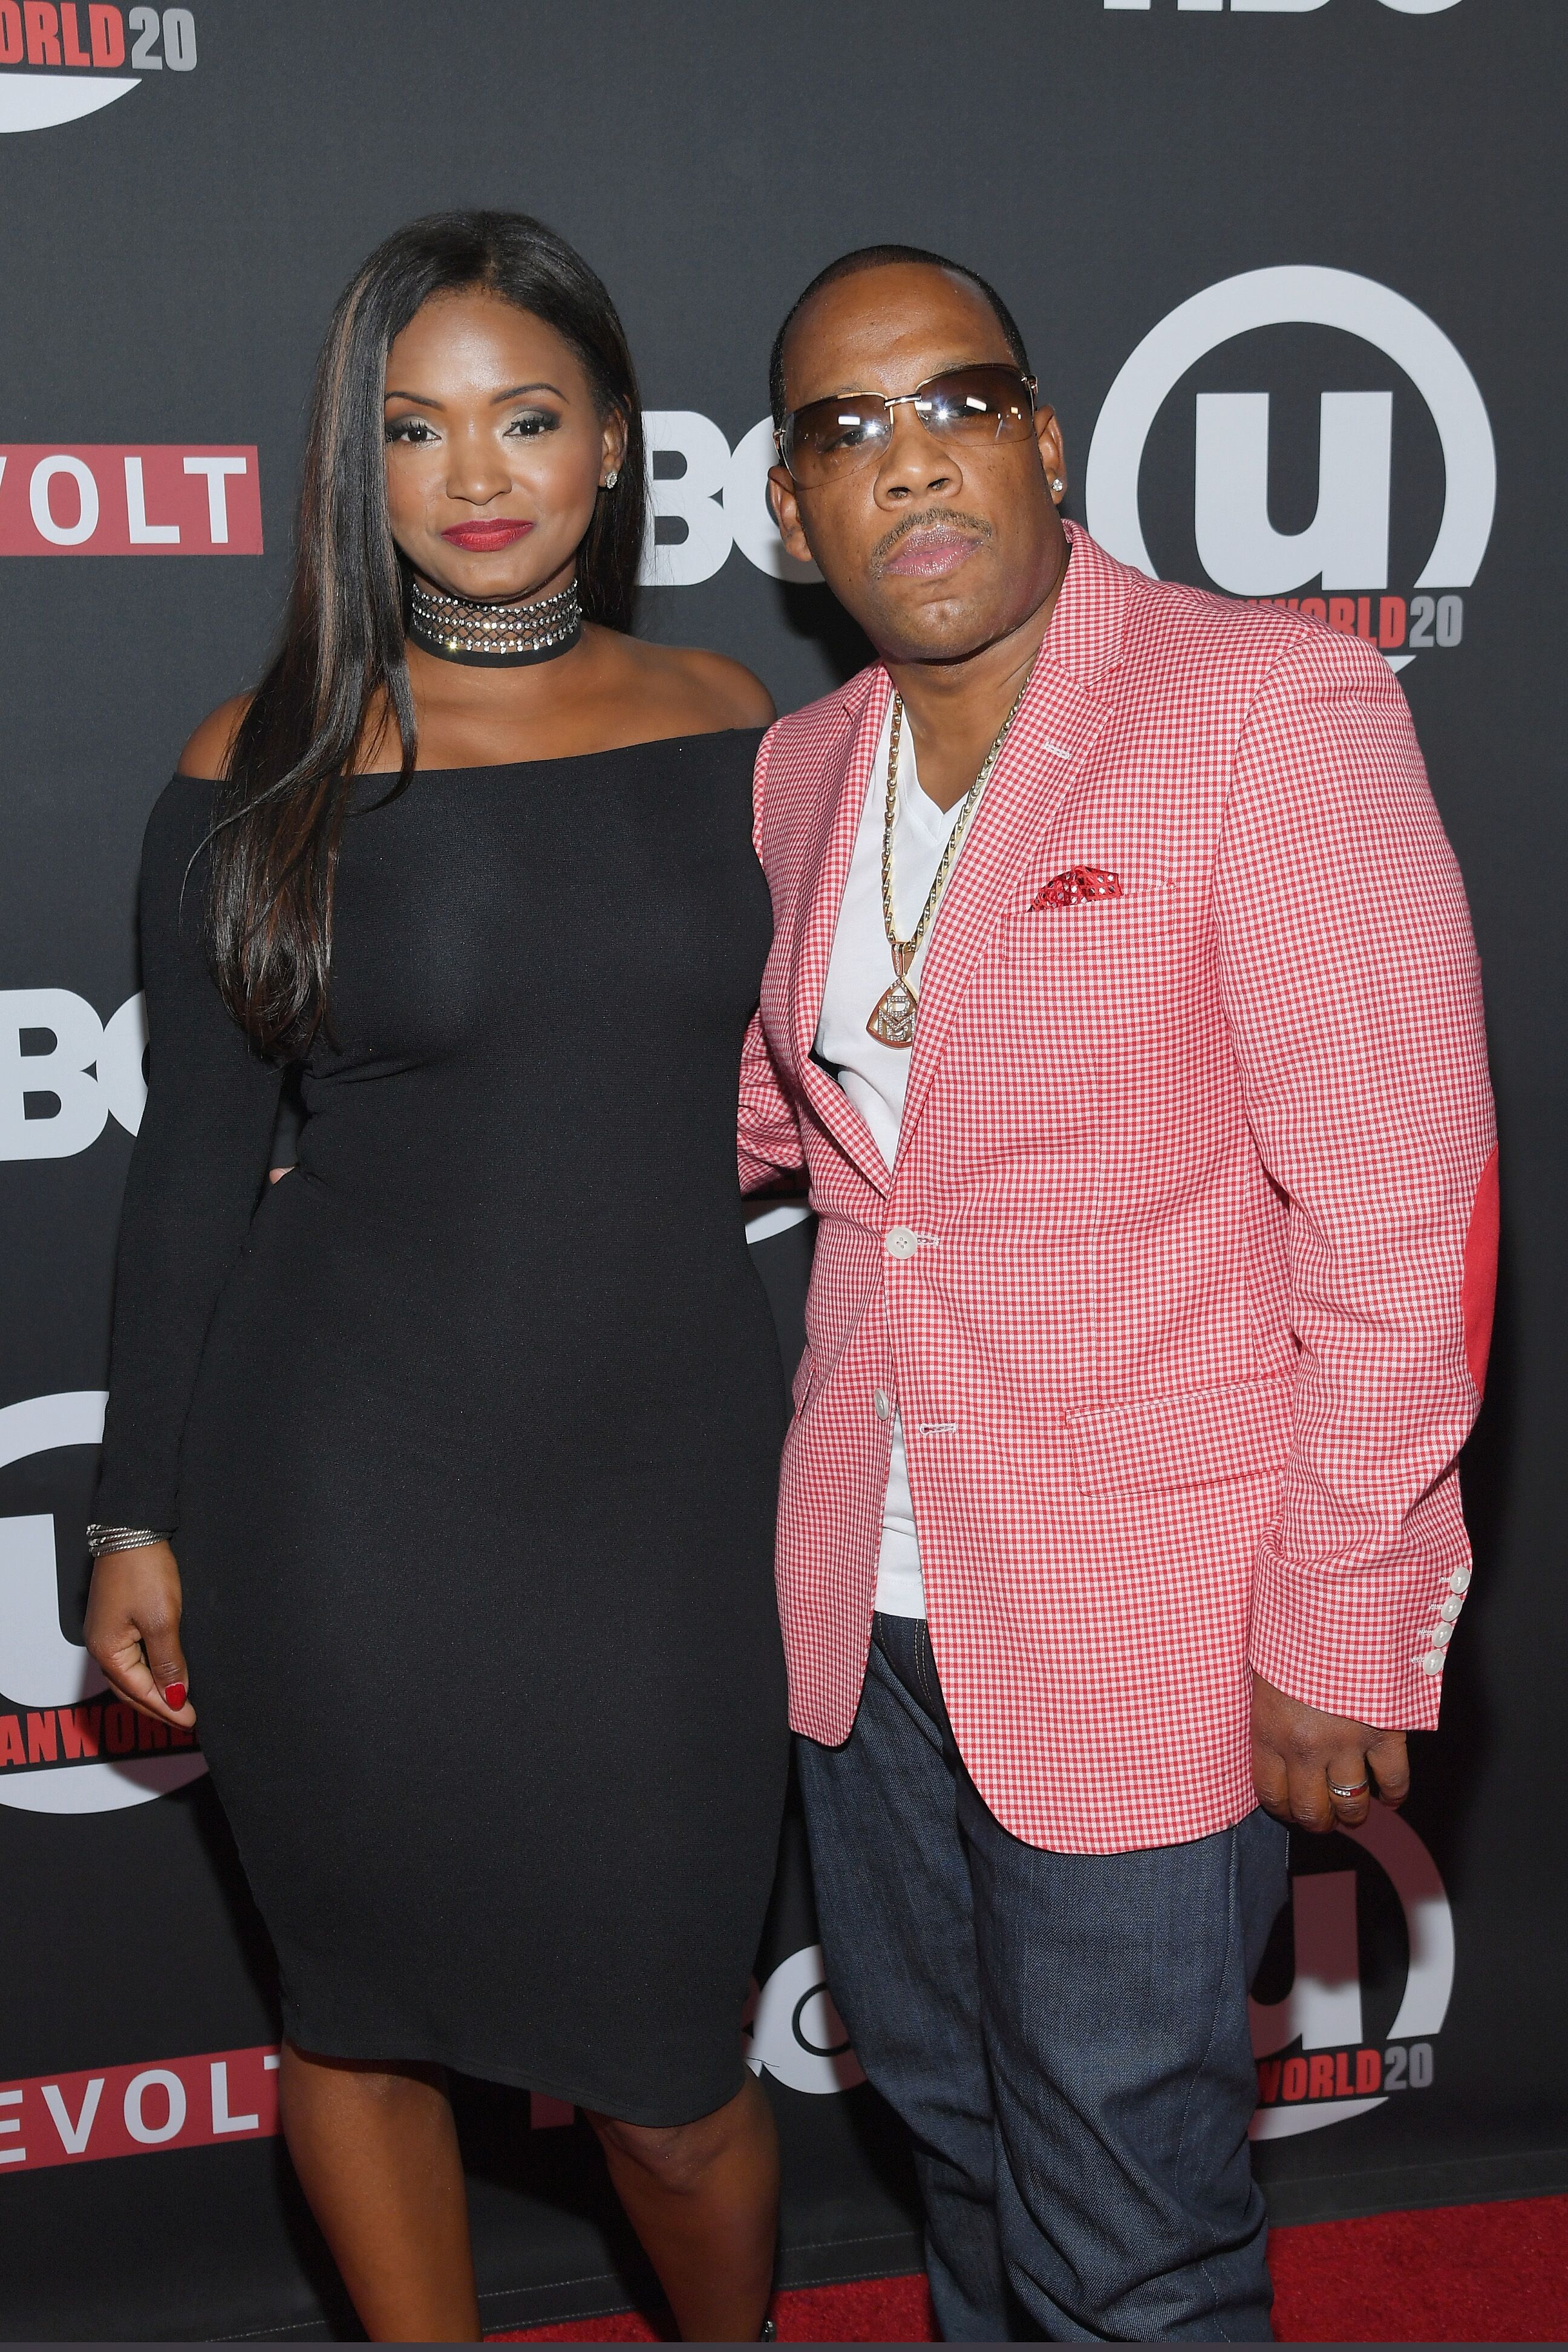 Teasha Bivins and Michael Bivins attend the 20th Annual Urbanworld Film Festival on September 23, 2016. | Photo: Getty Images